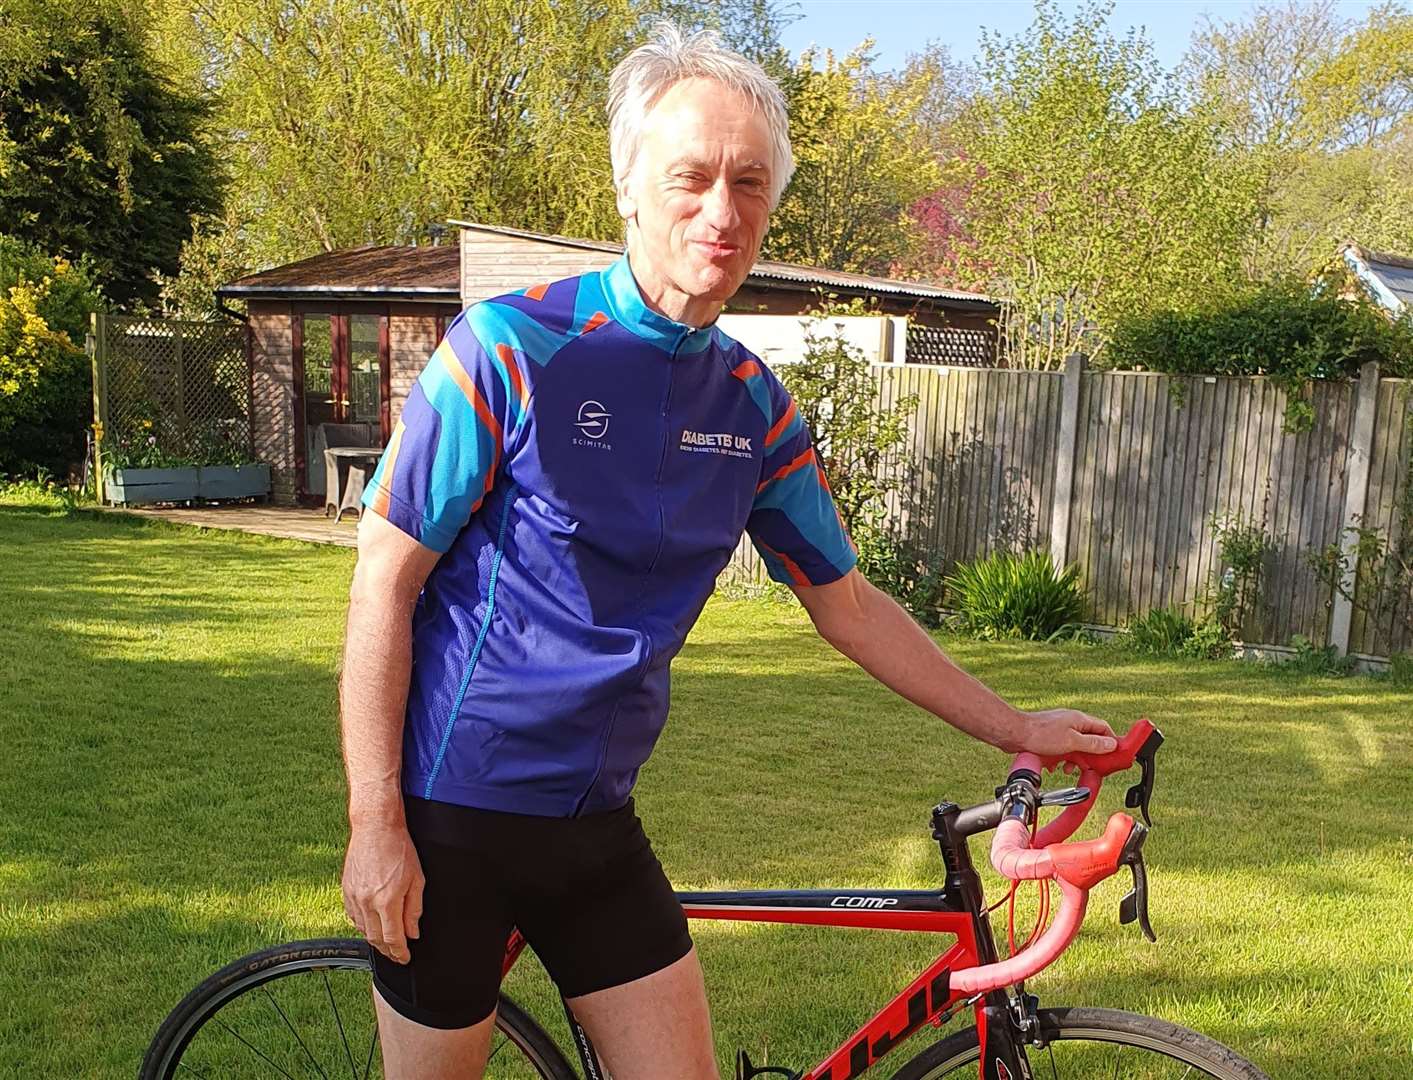 Karl Royer has set himself an epic cycling challenge